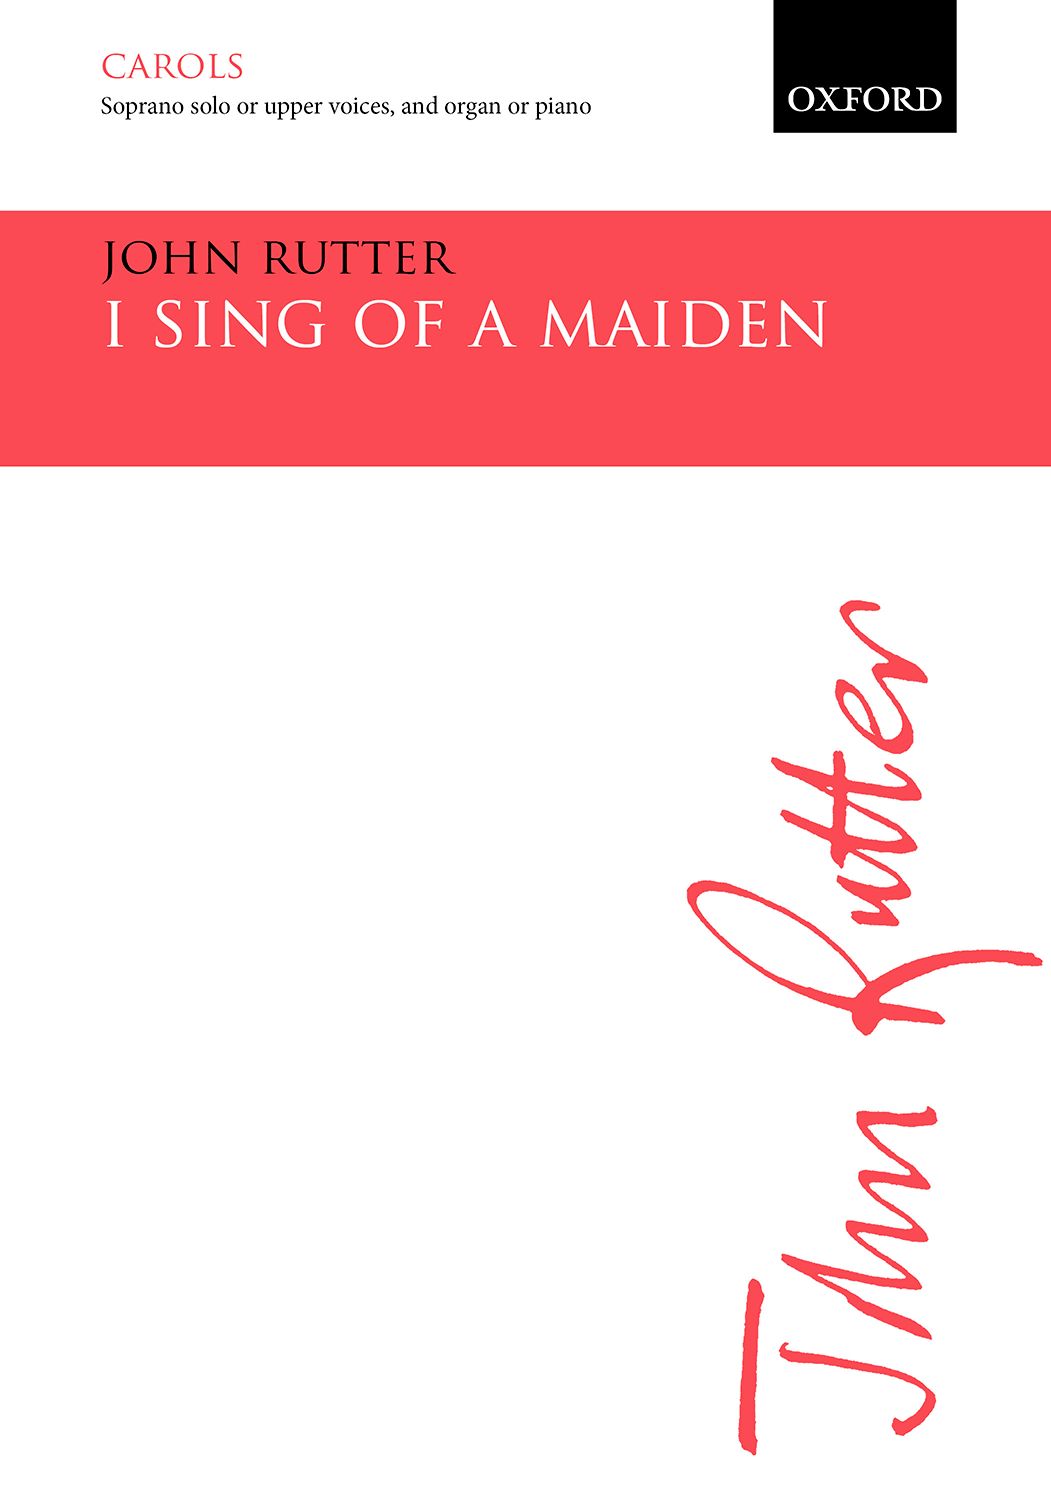 John Rutter: I sing of a maiden: Upper Voices and Piano/Organ: Choral Score